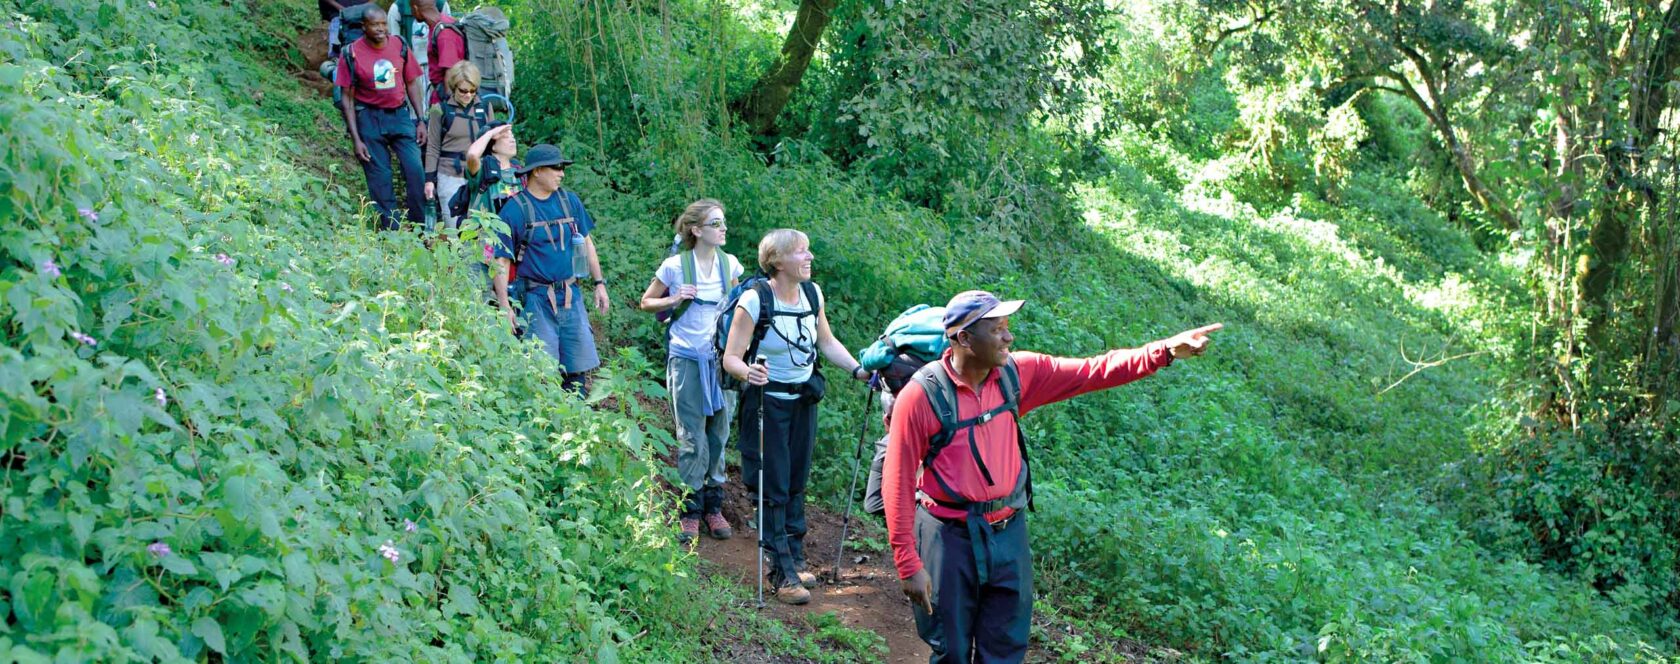 A group of travelers hiking in Kilimanjaro.